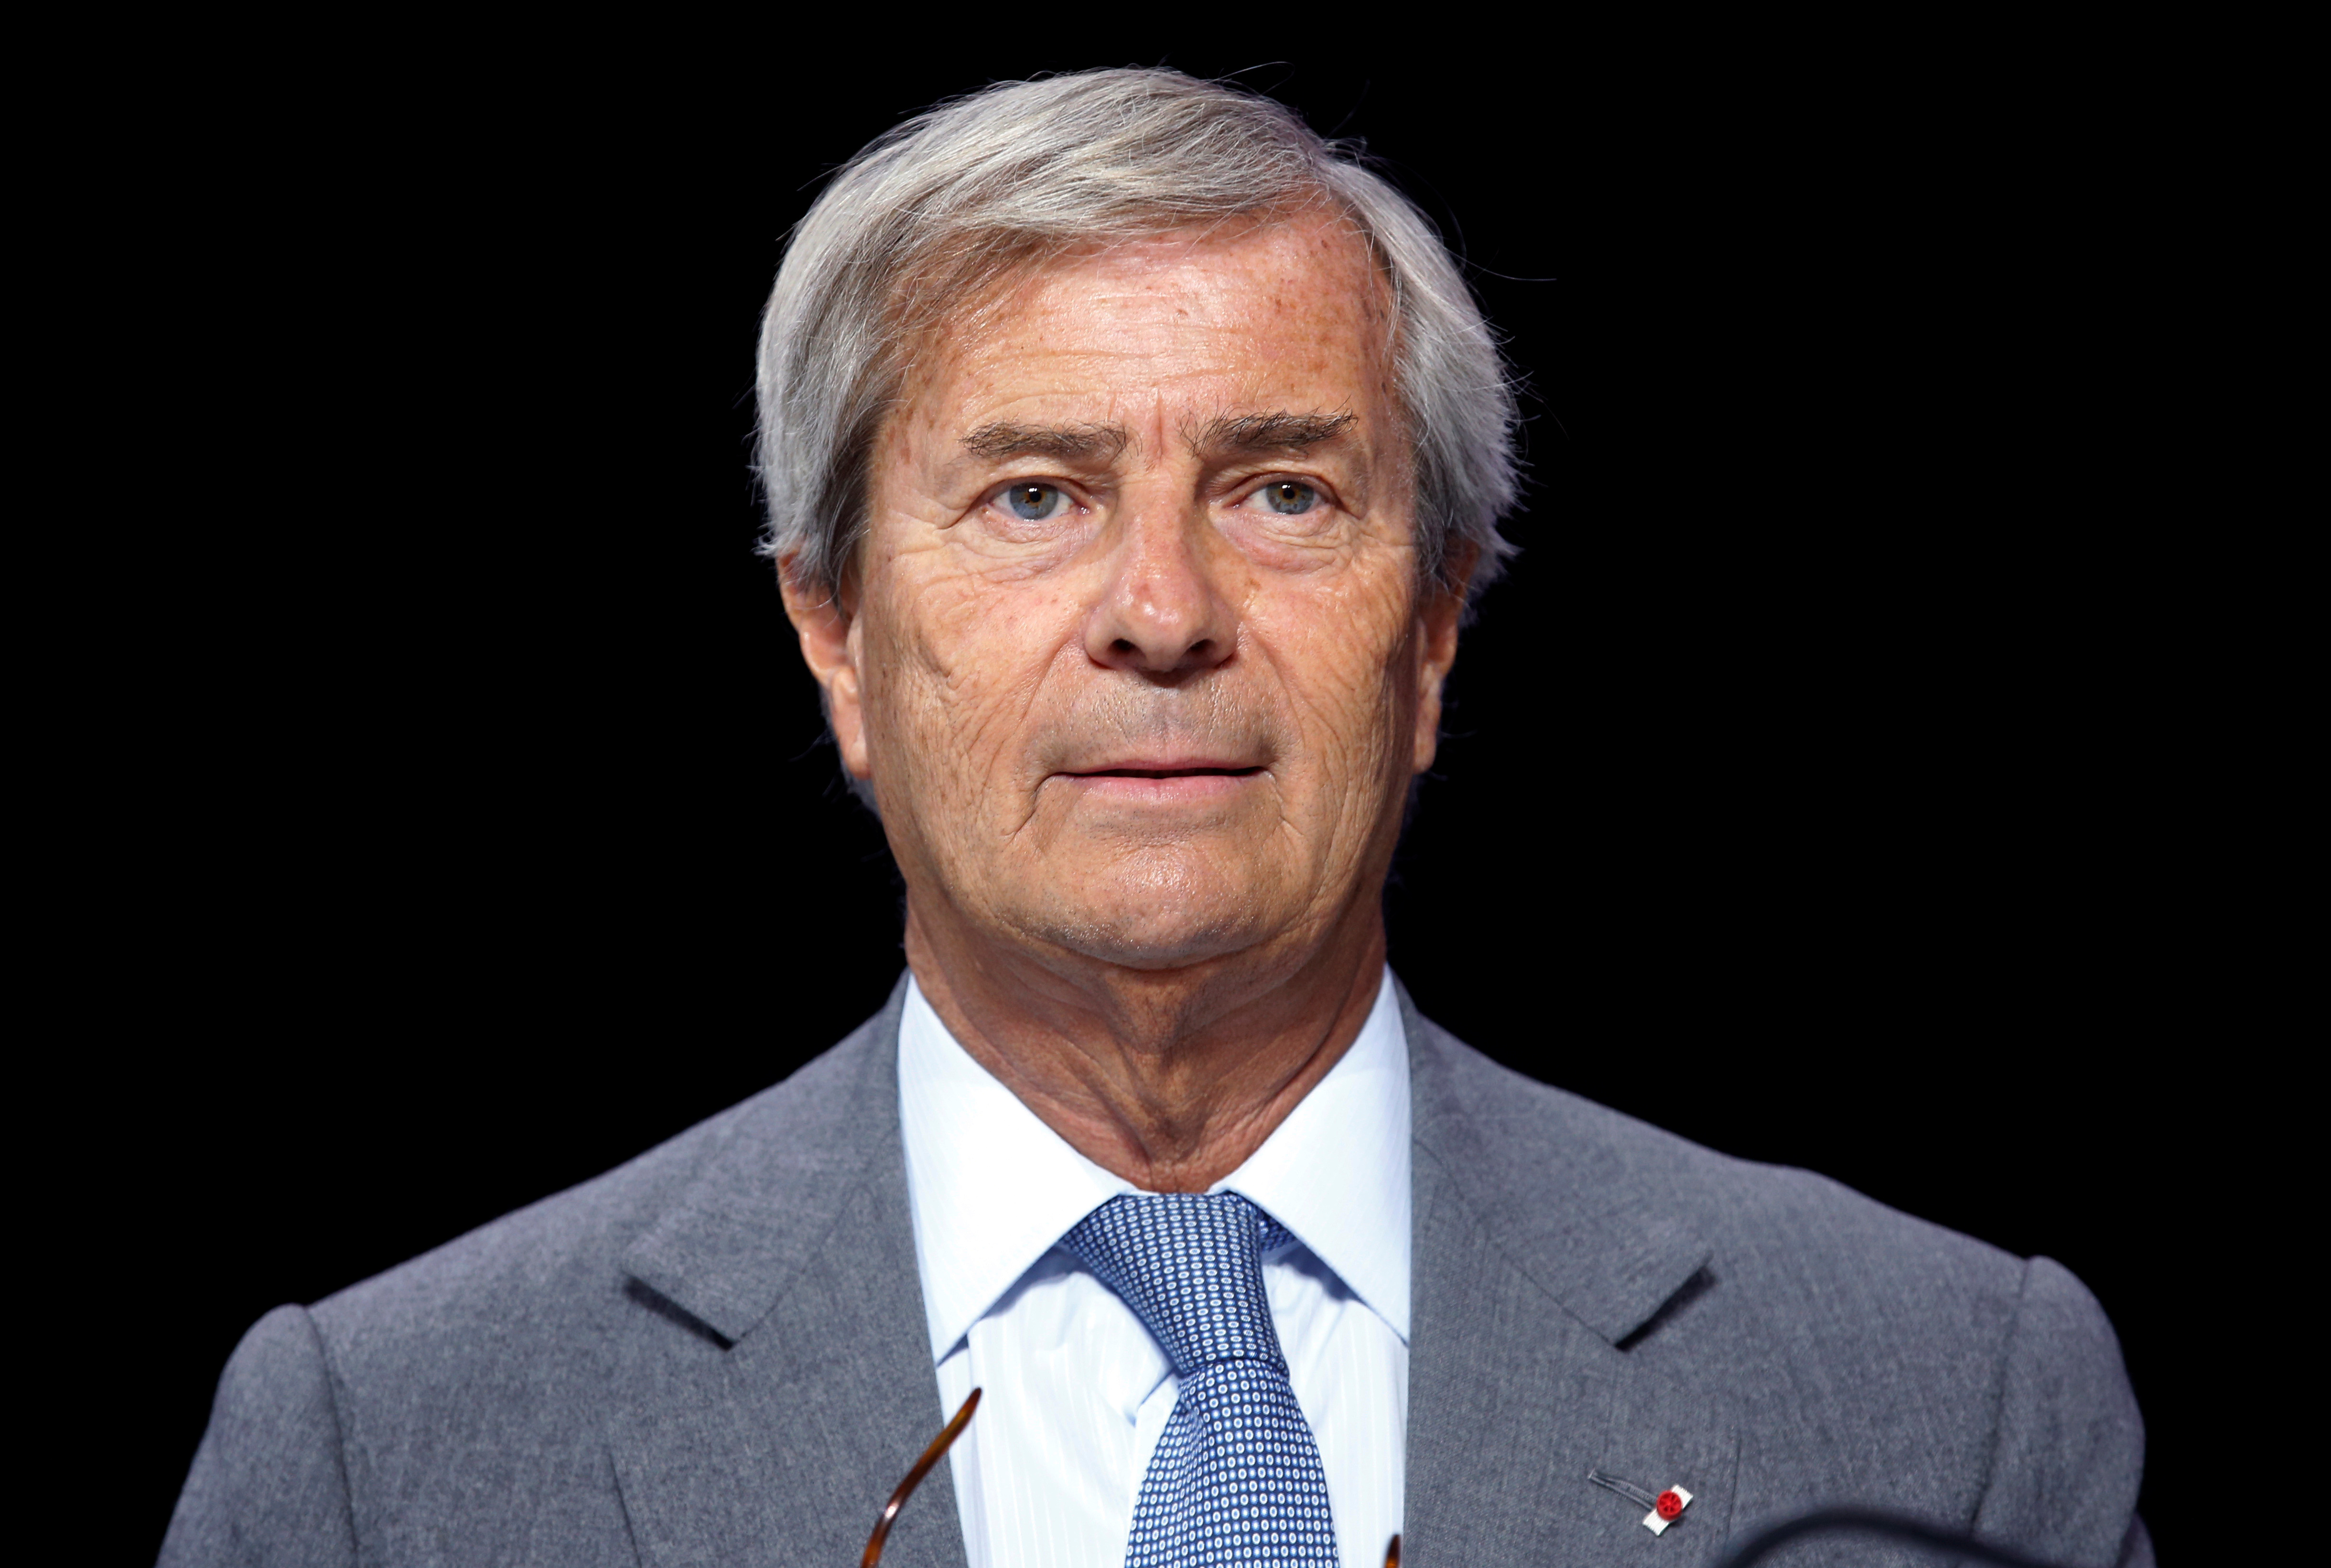 Vincent Bollore, Chairman of media group Vivendi attends the company's shareholders meeting in Paris